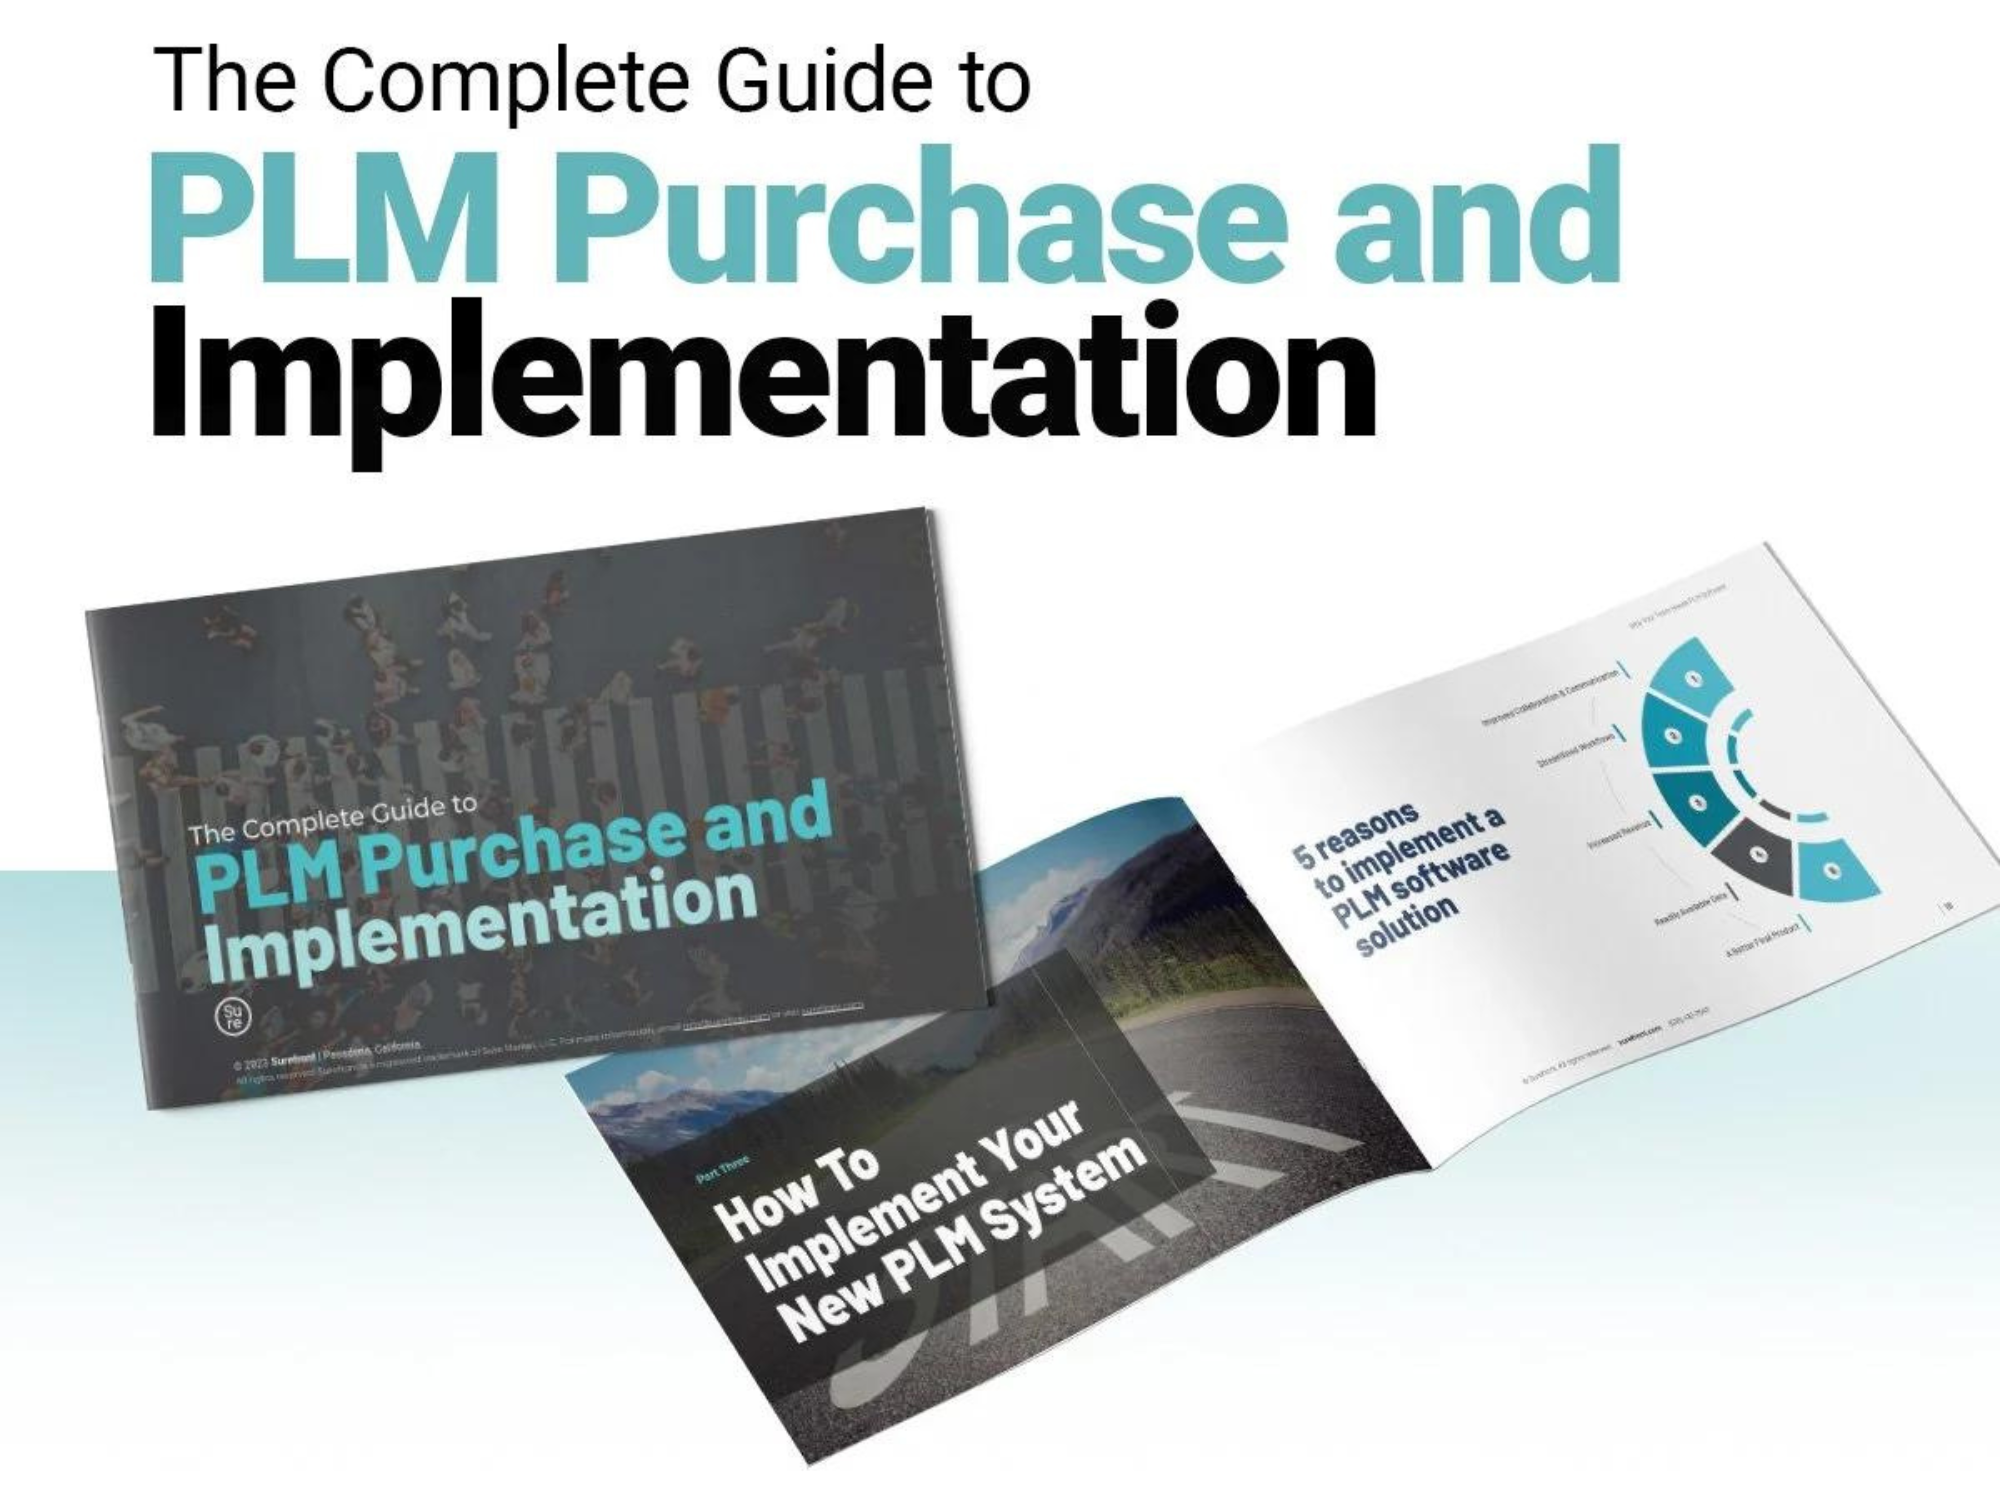 Complete Guide to PLM Purchase and Implementation